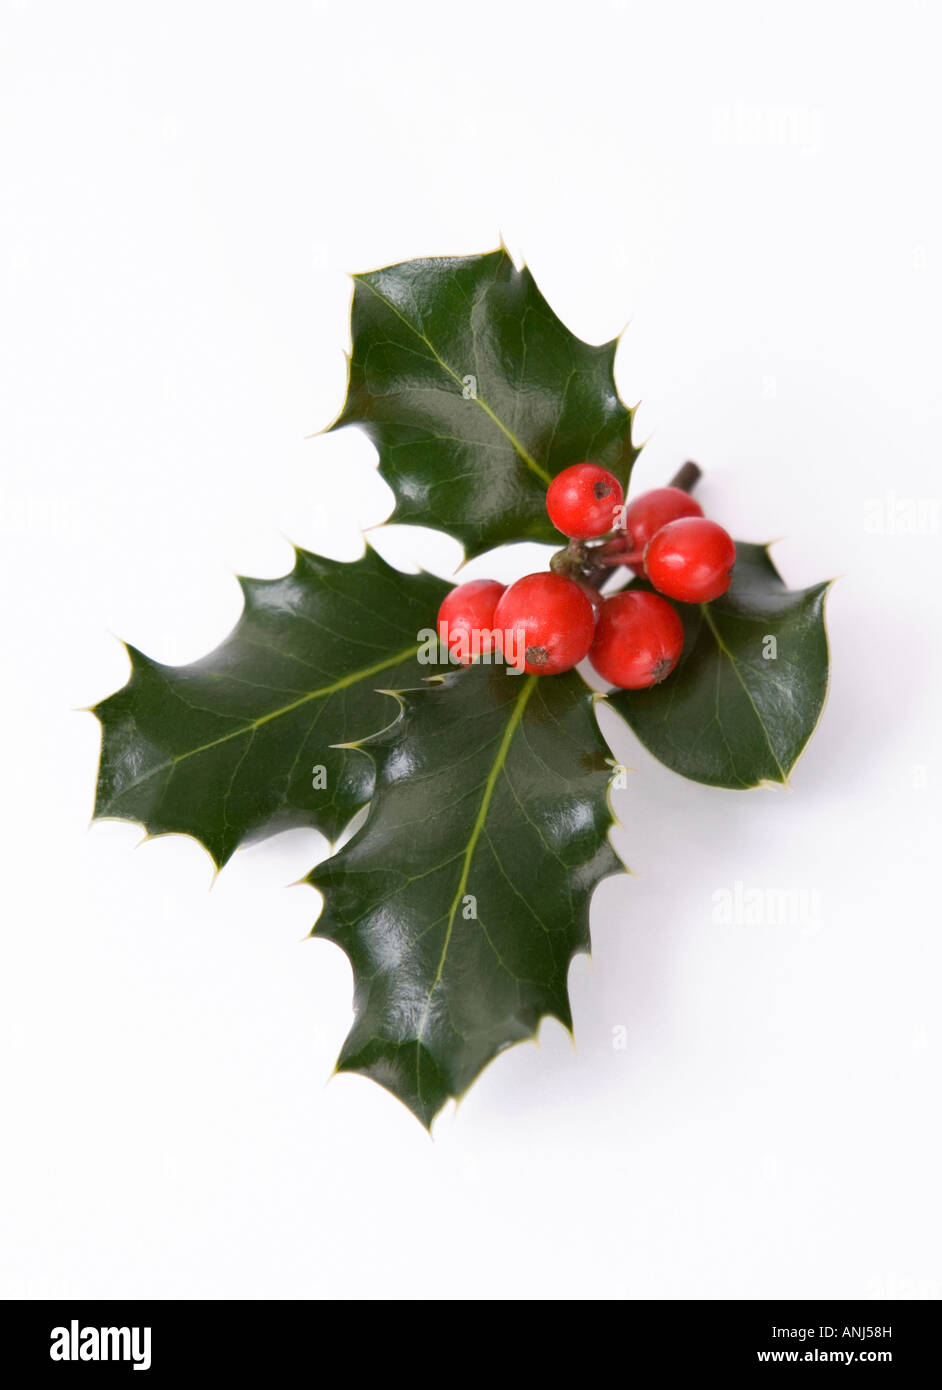 A sprig of holly leaves and red berries on white background Stock Photo